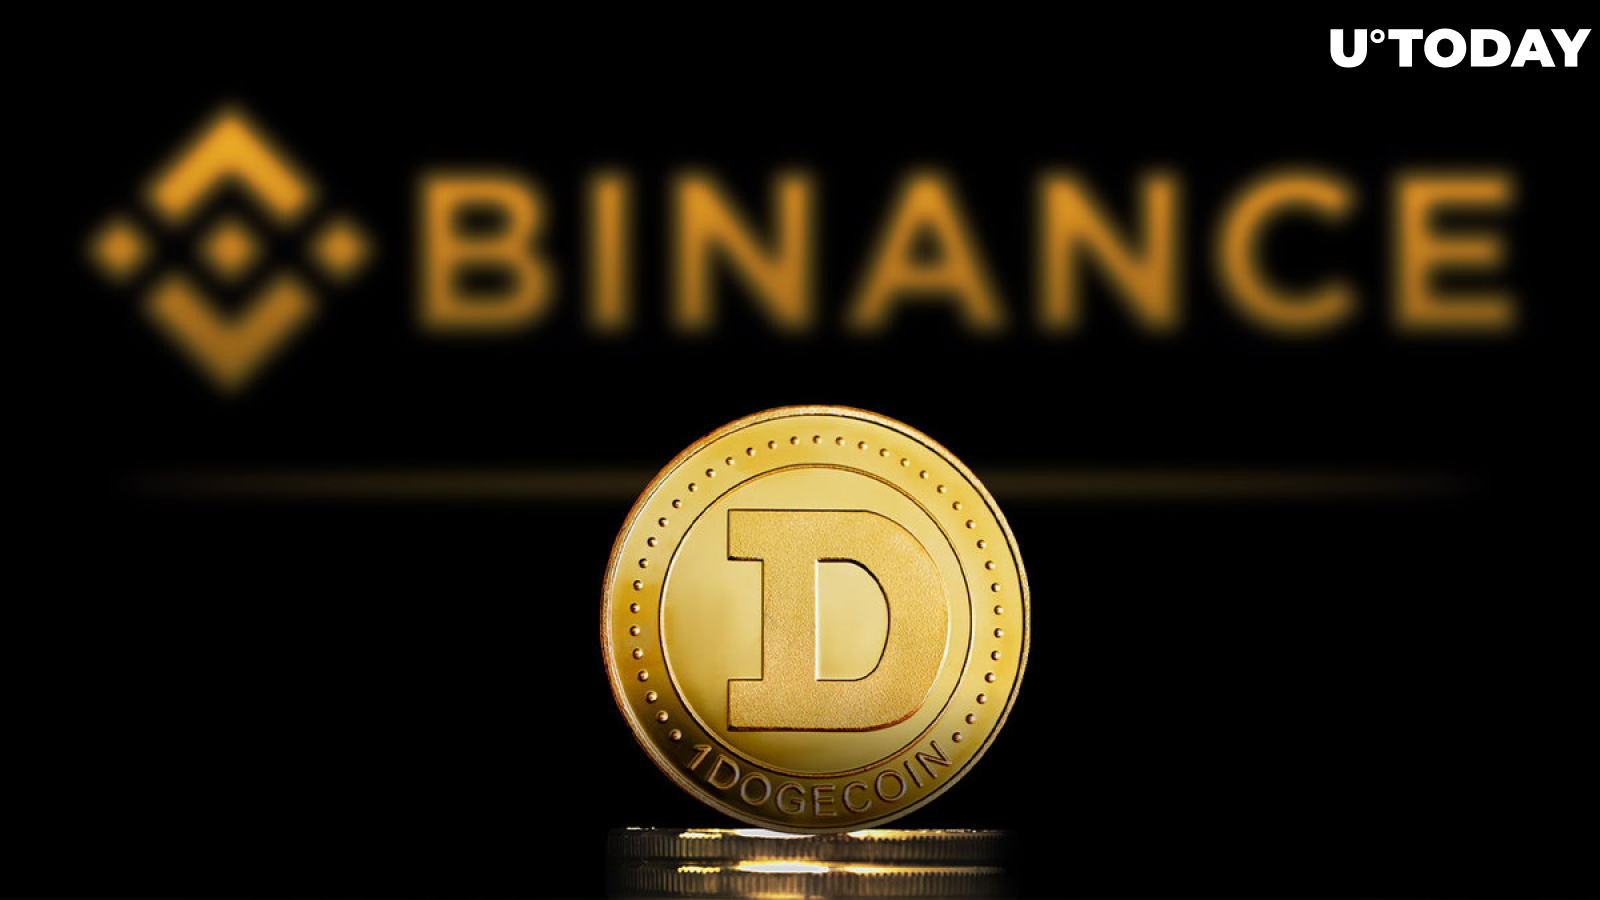 Dogecoin Holders to Get New Reward Points from Binance